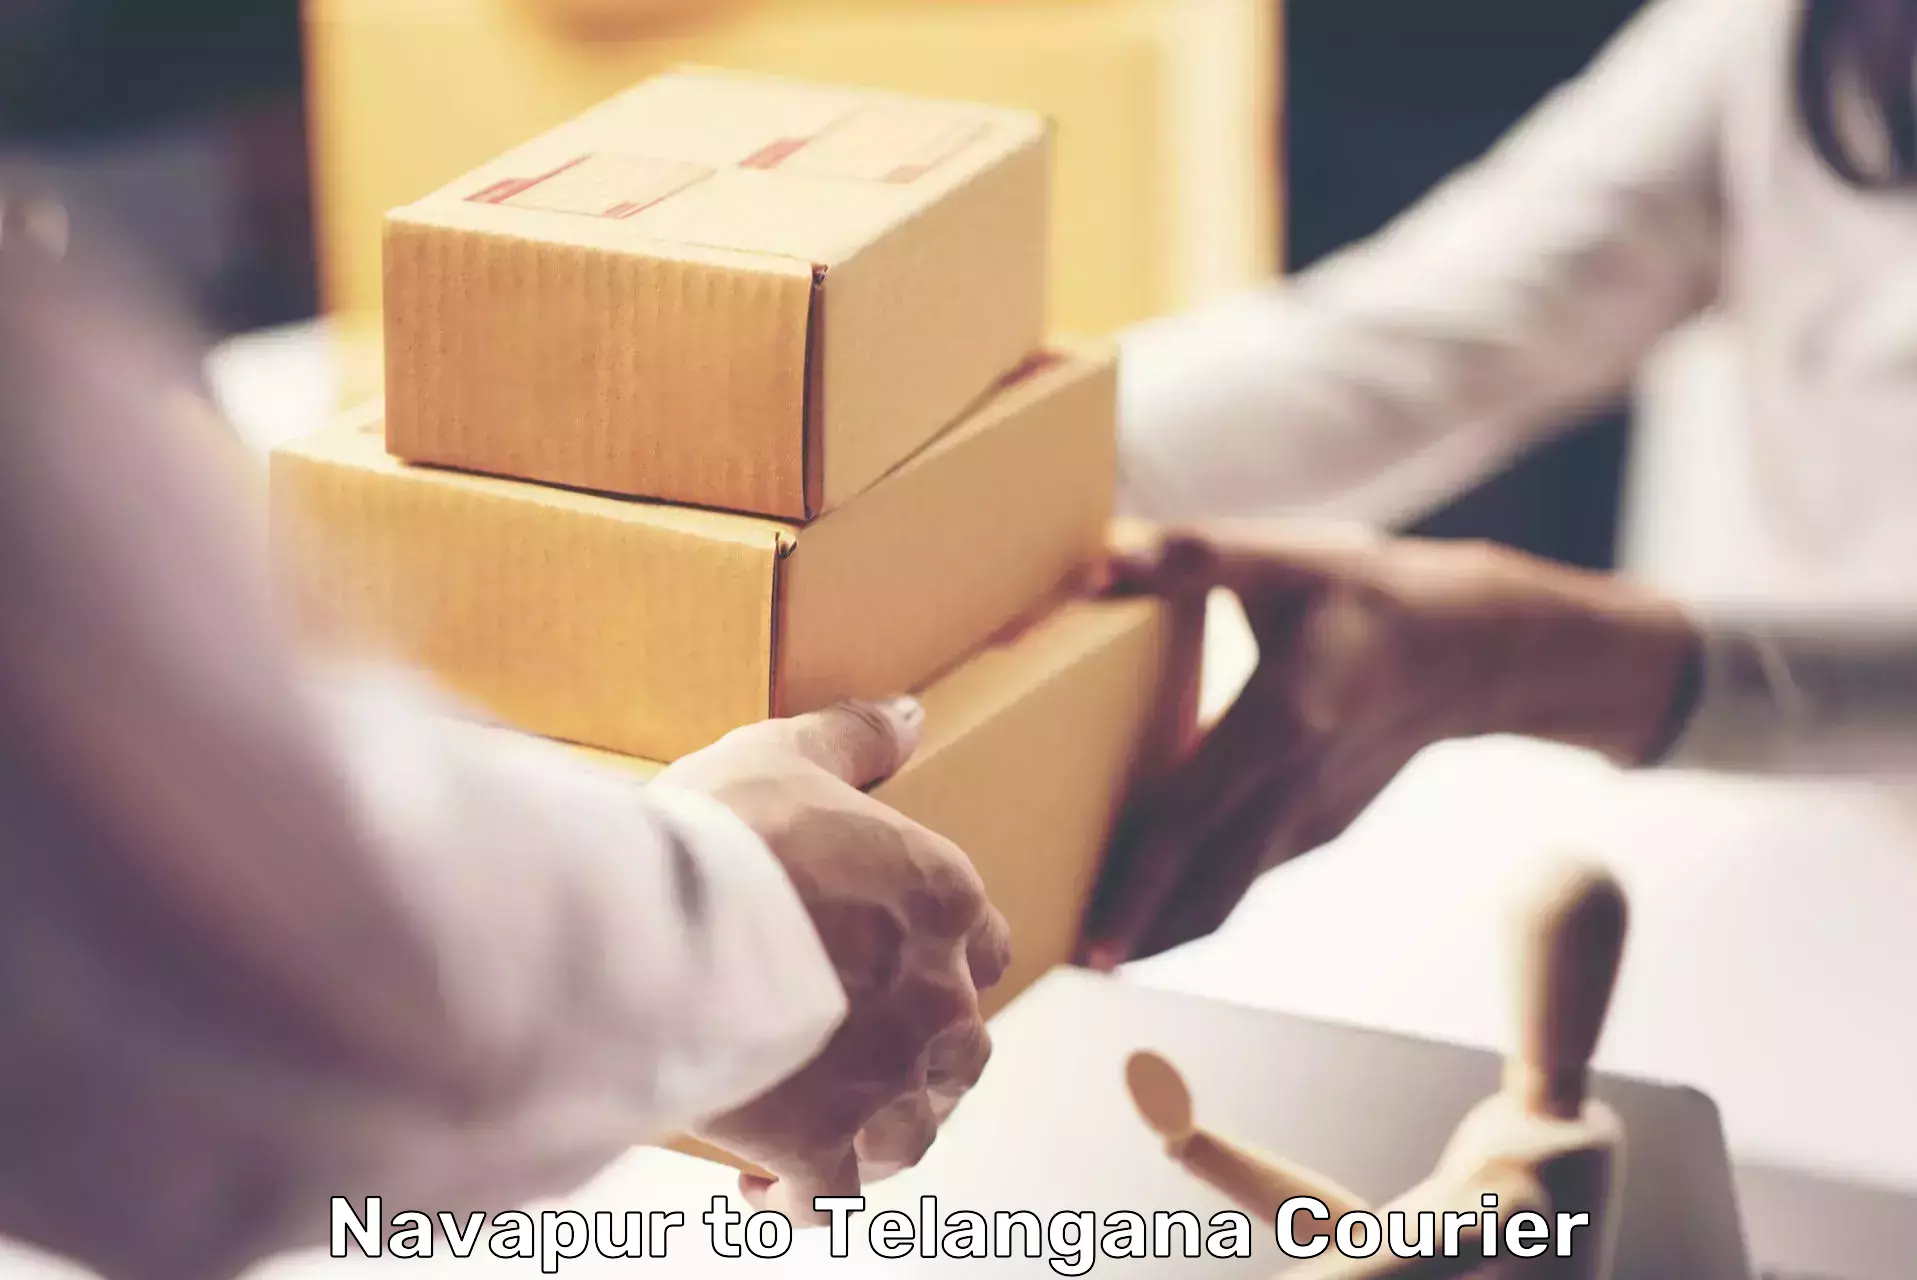 Reliable parcel services in Navapur to Secunderabad